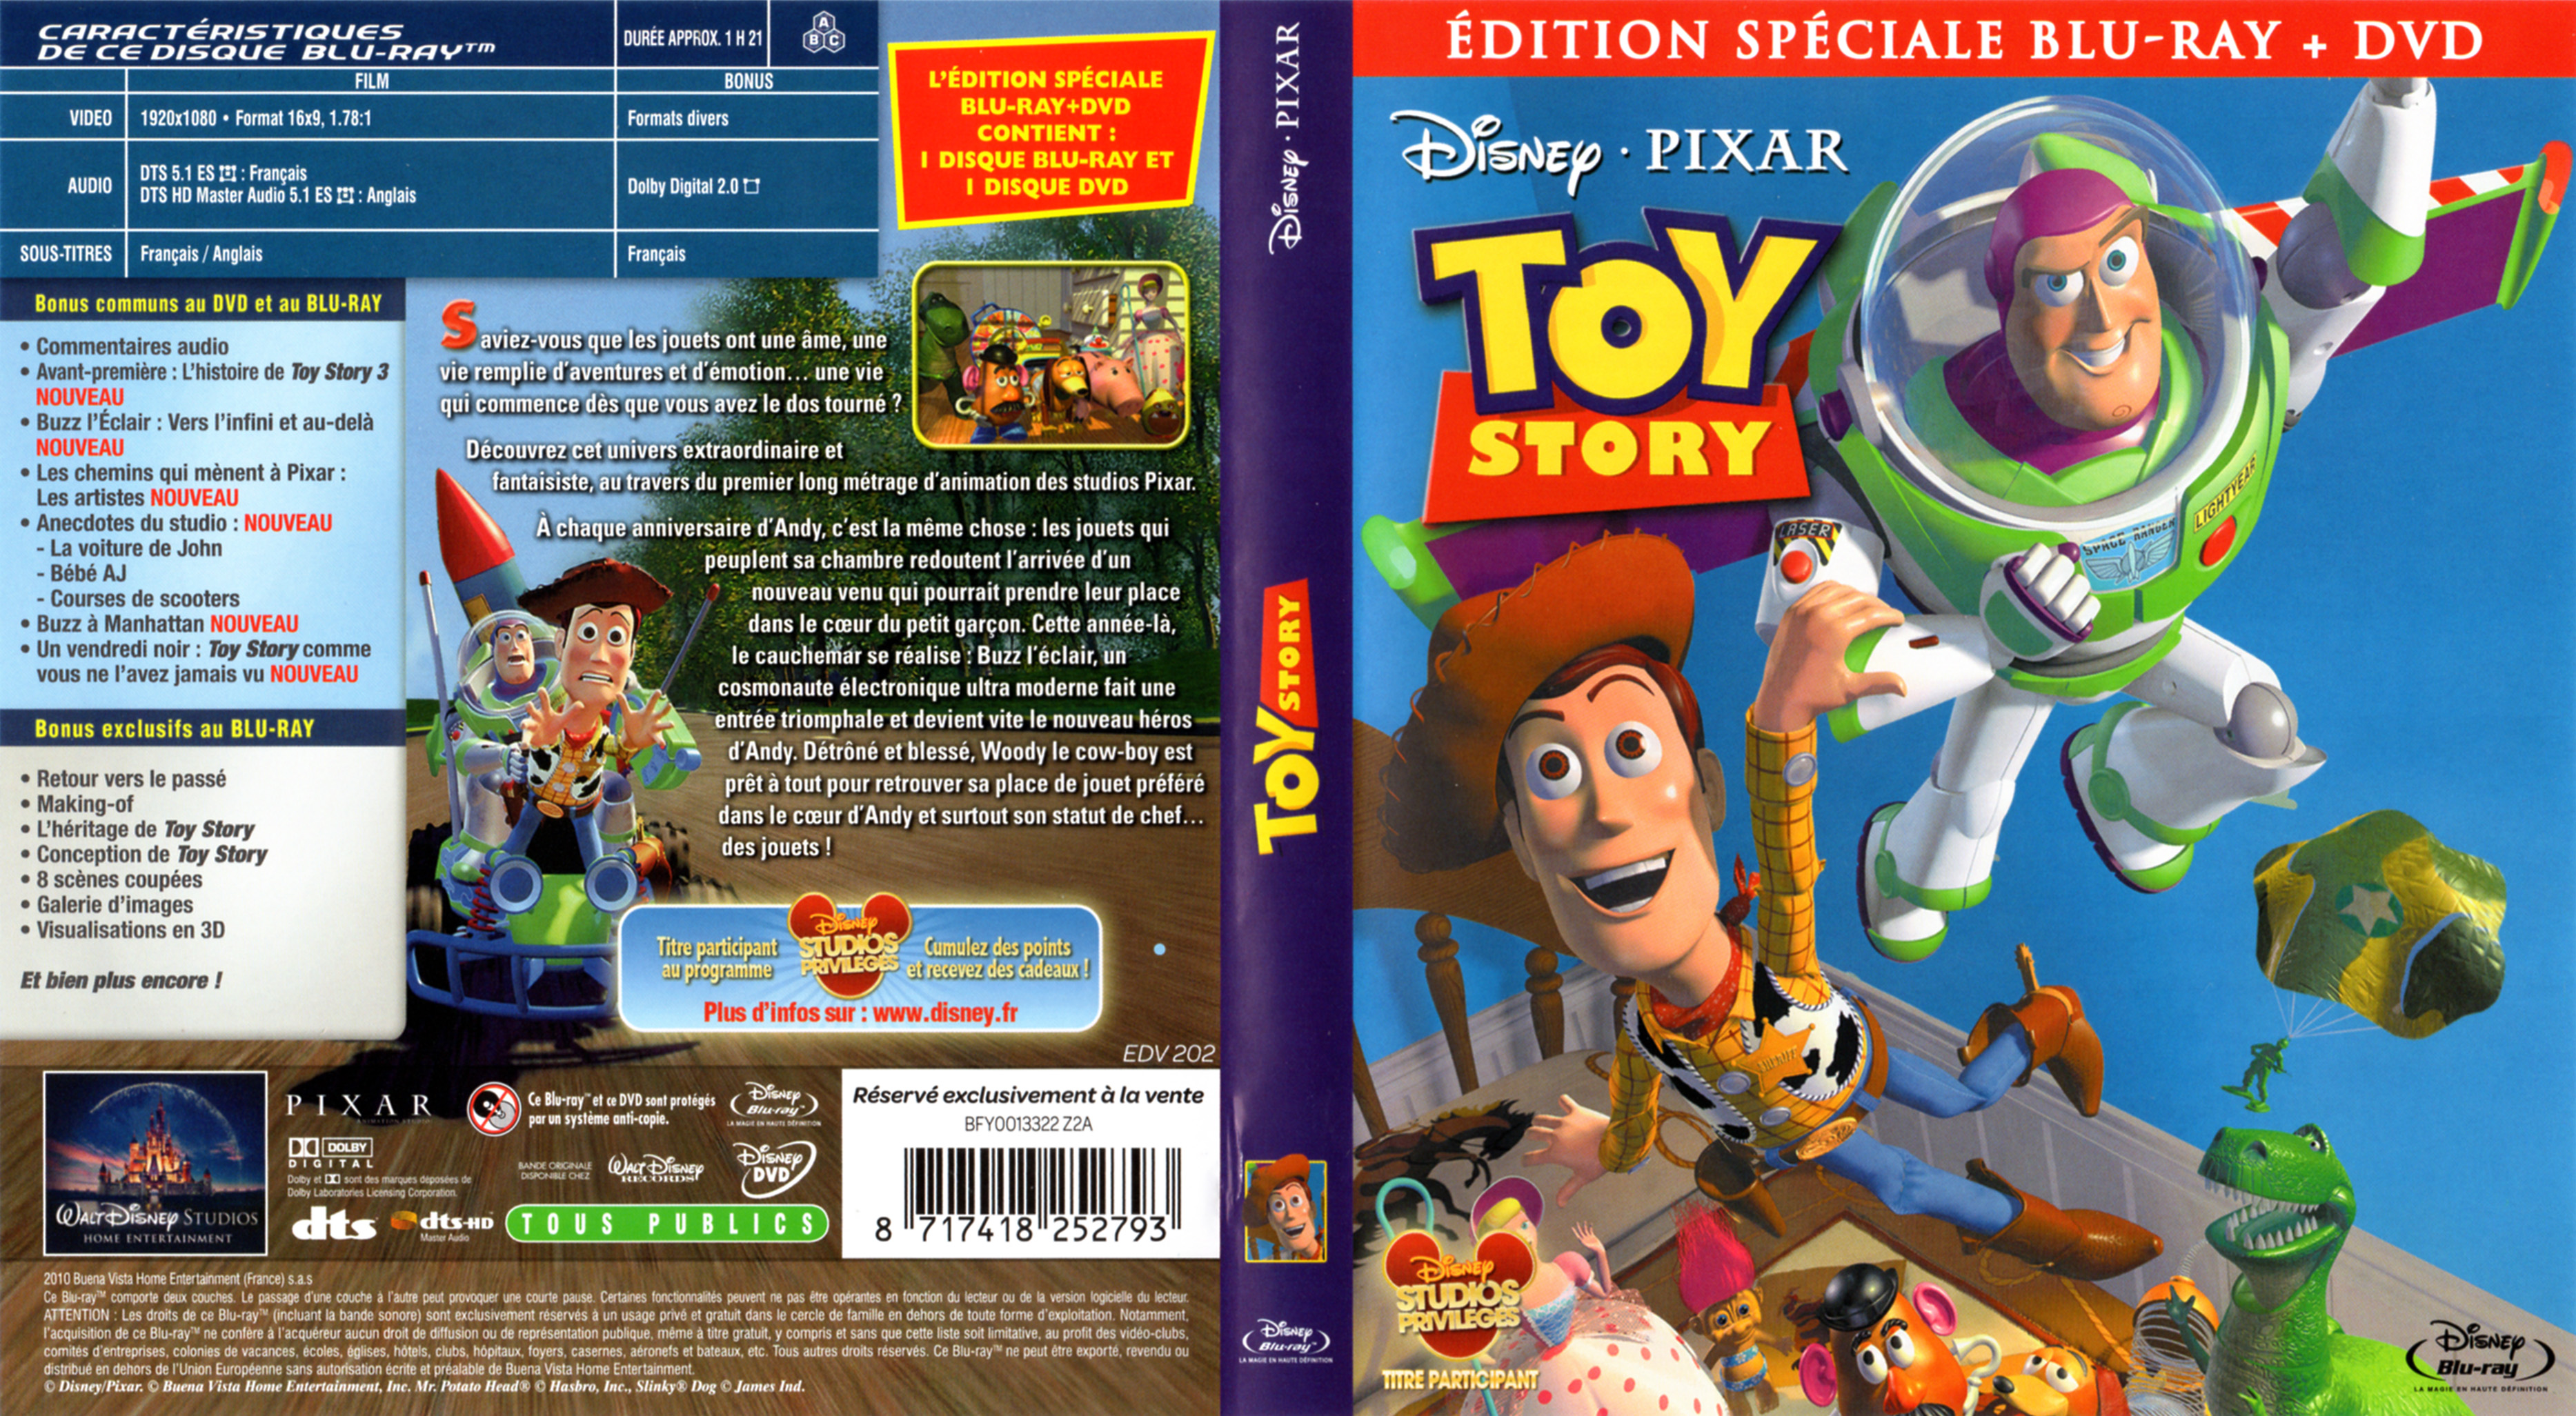 Jaquette DVD Toy story (BLU-RAY) v2